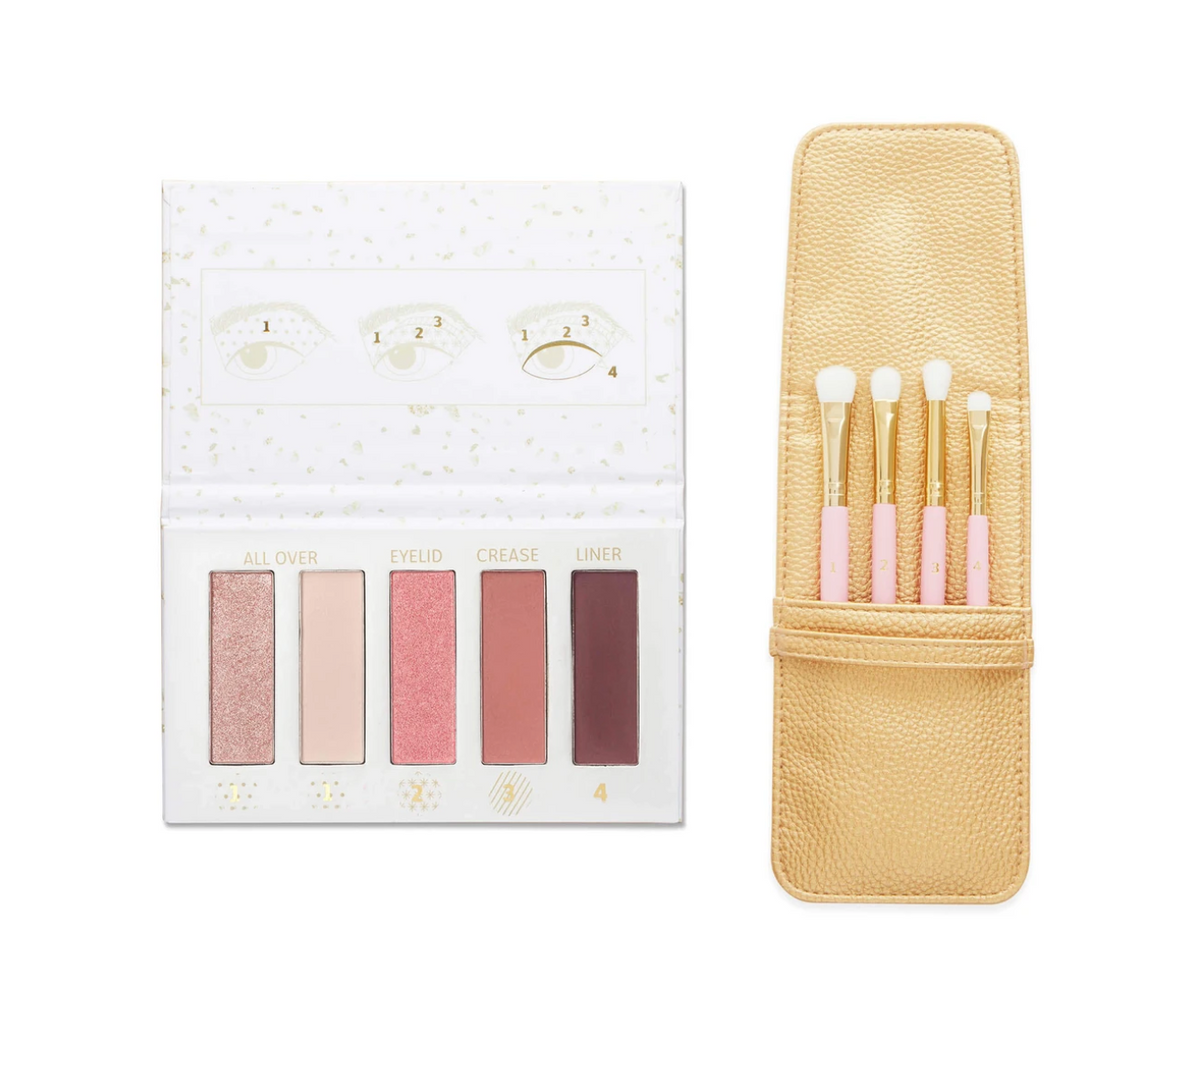 Flair Eyeshadow Palette and 4-Piece Brush Set